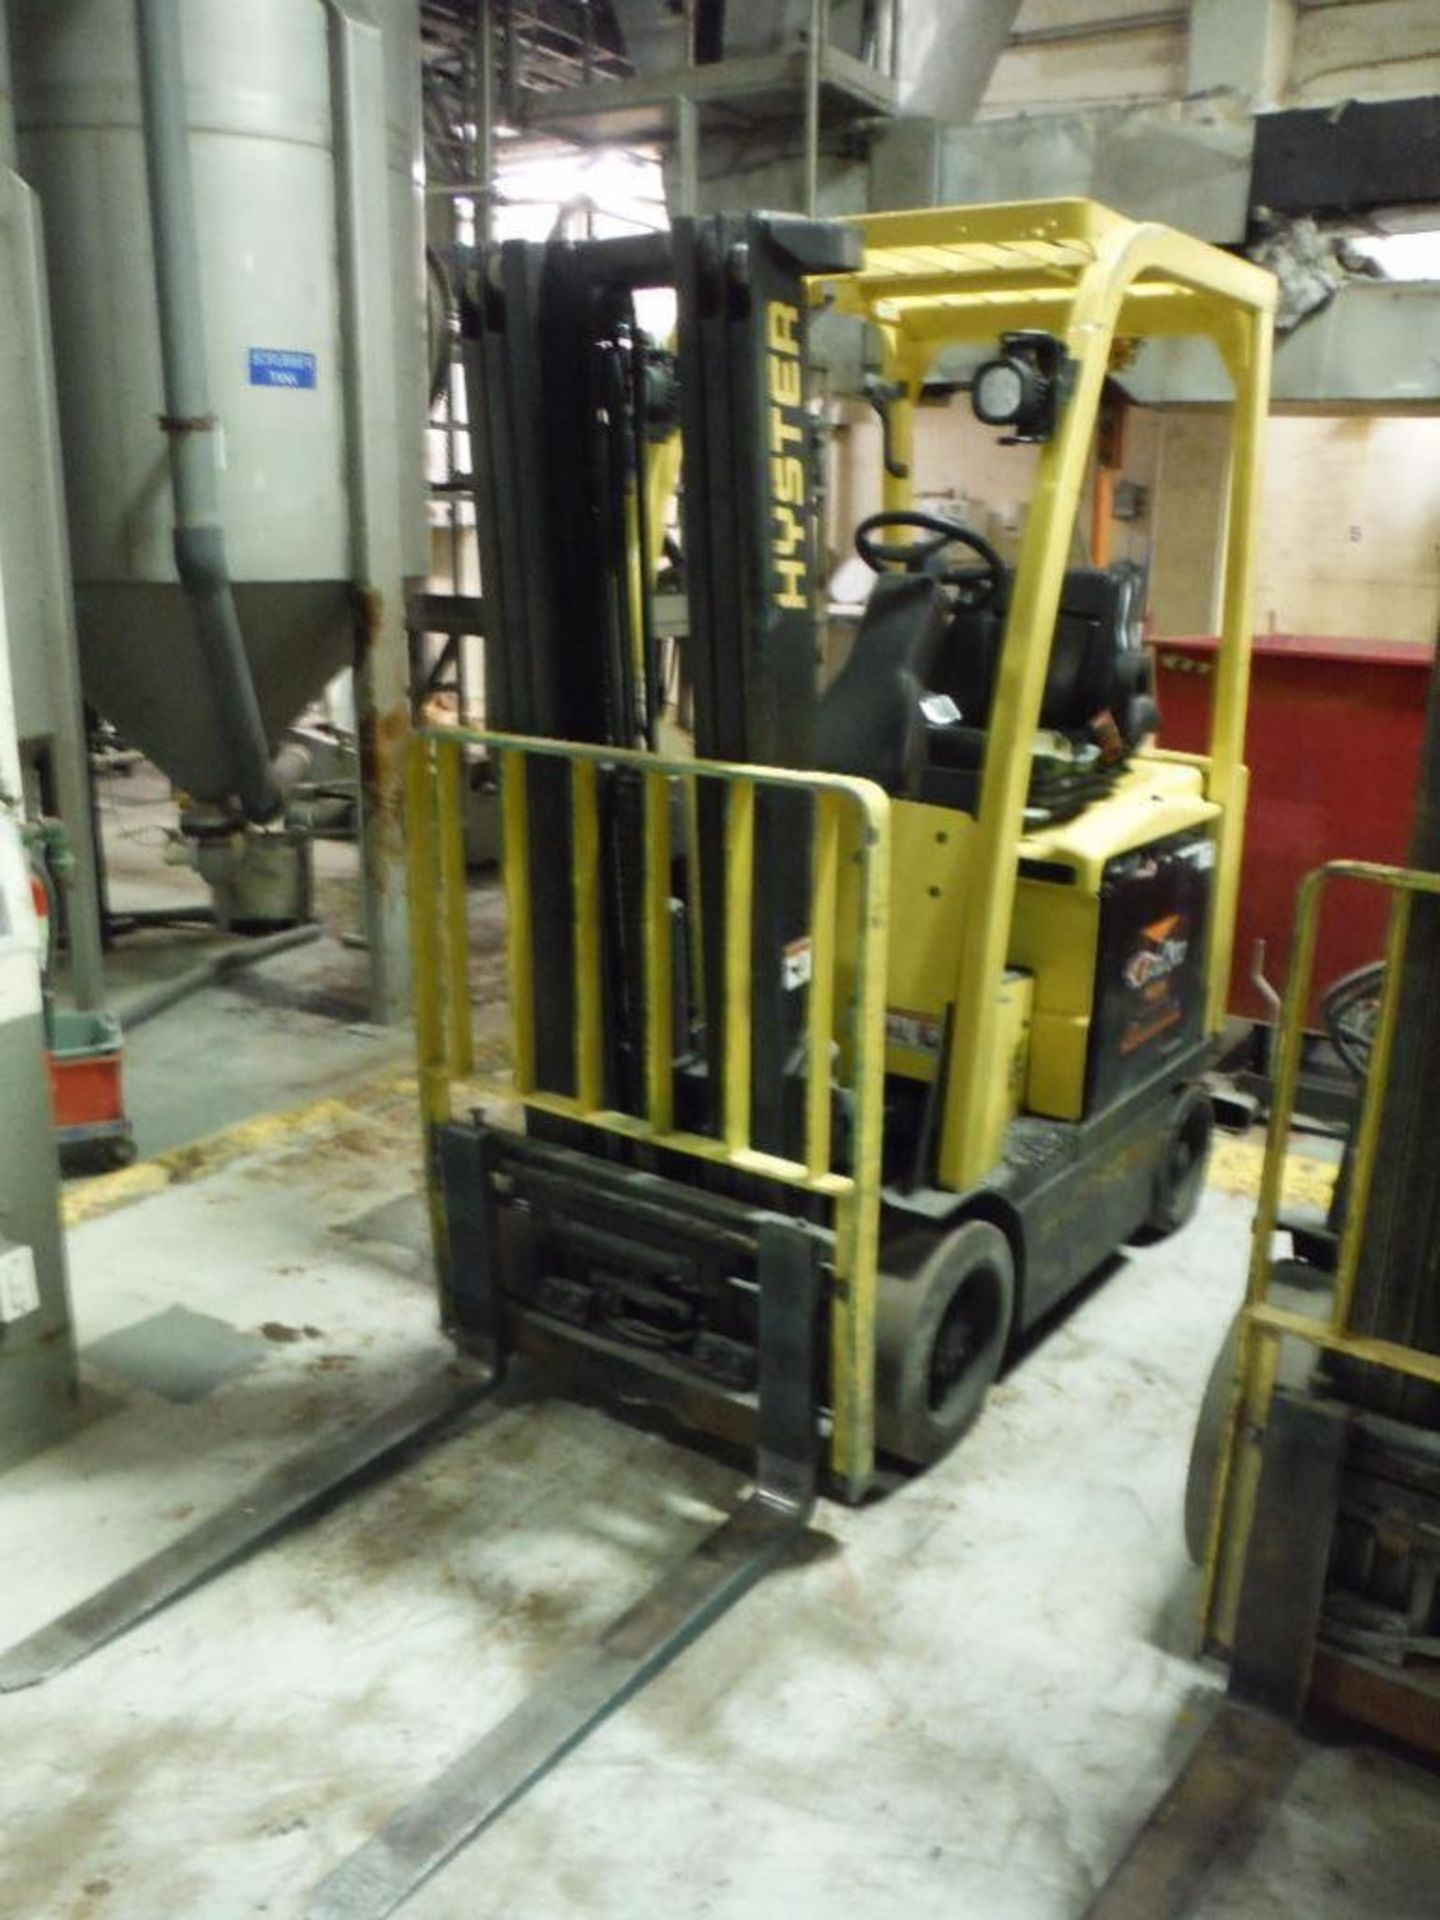 Hyster 36 volt forklift, Model E40XN, SN A269N02069L, 3600 lb. capacity, 187 in. lift height, low